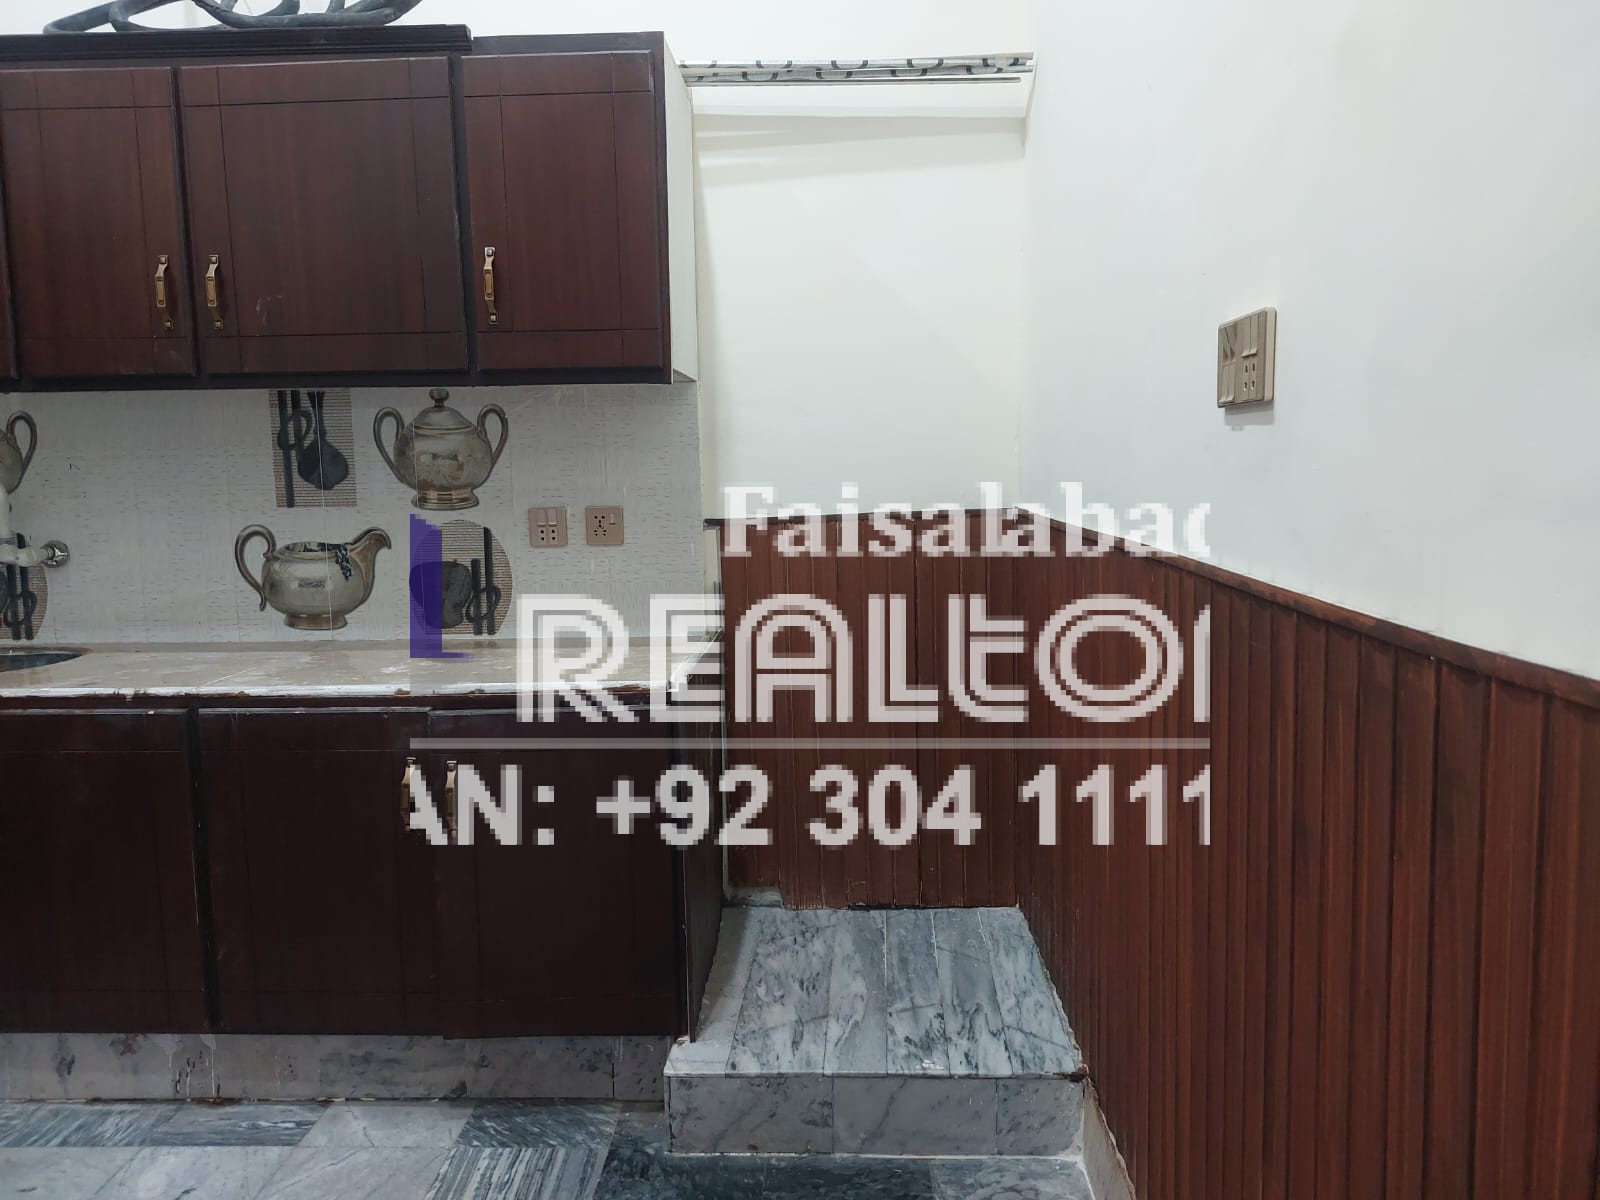 5 House For Rent in Faisalabad - Faisalabad Realtors